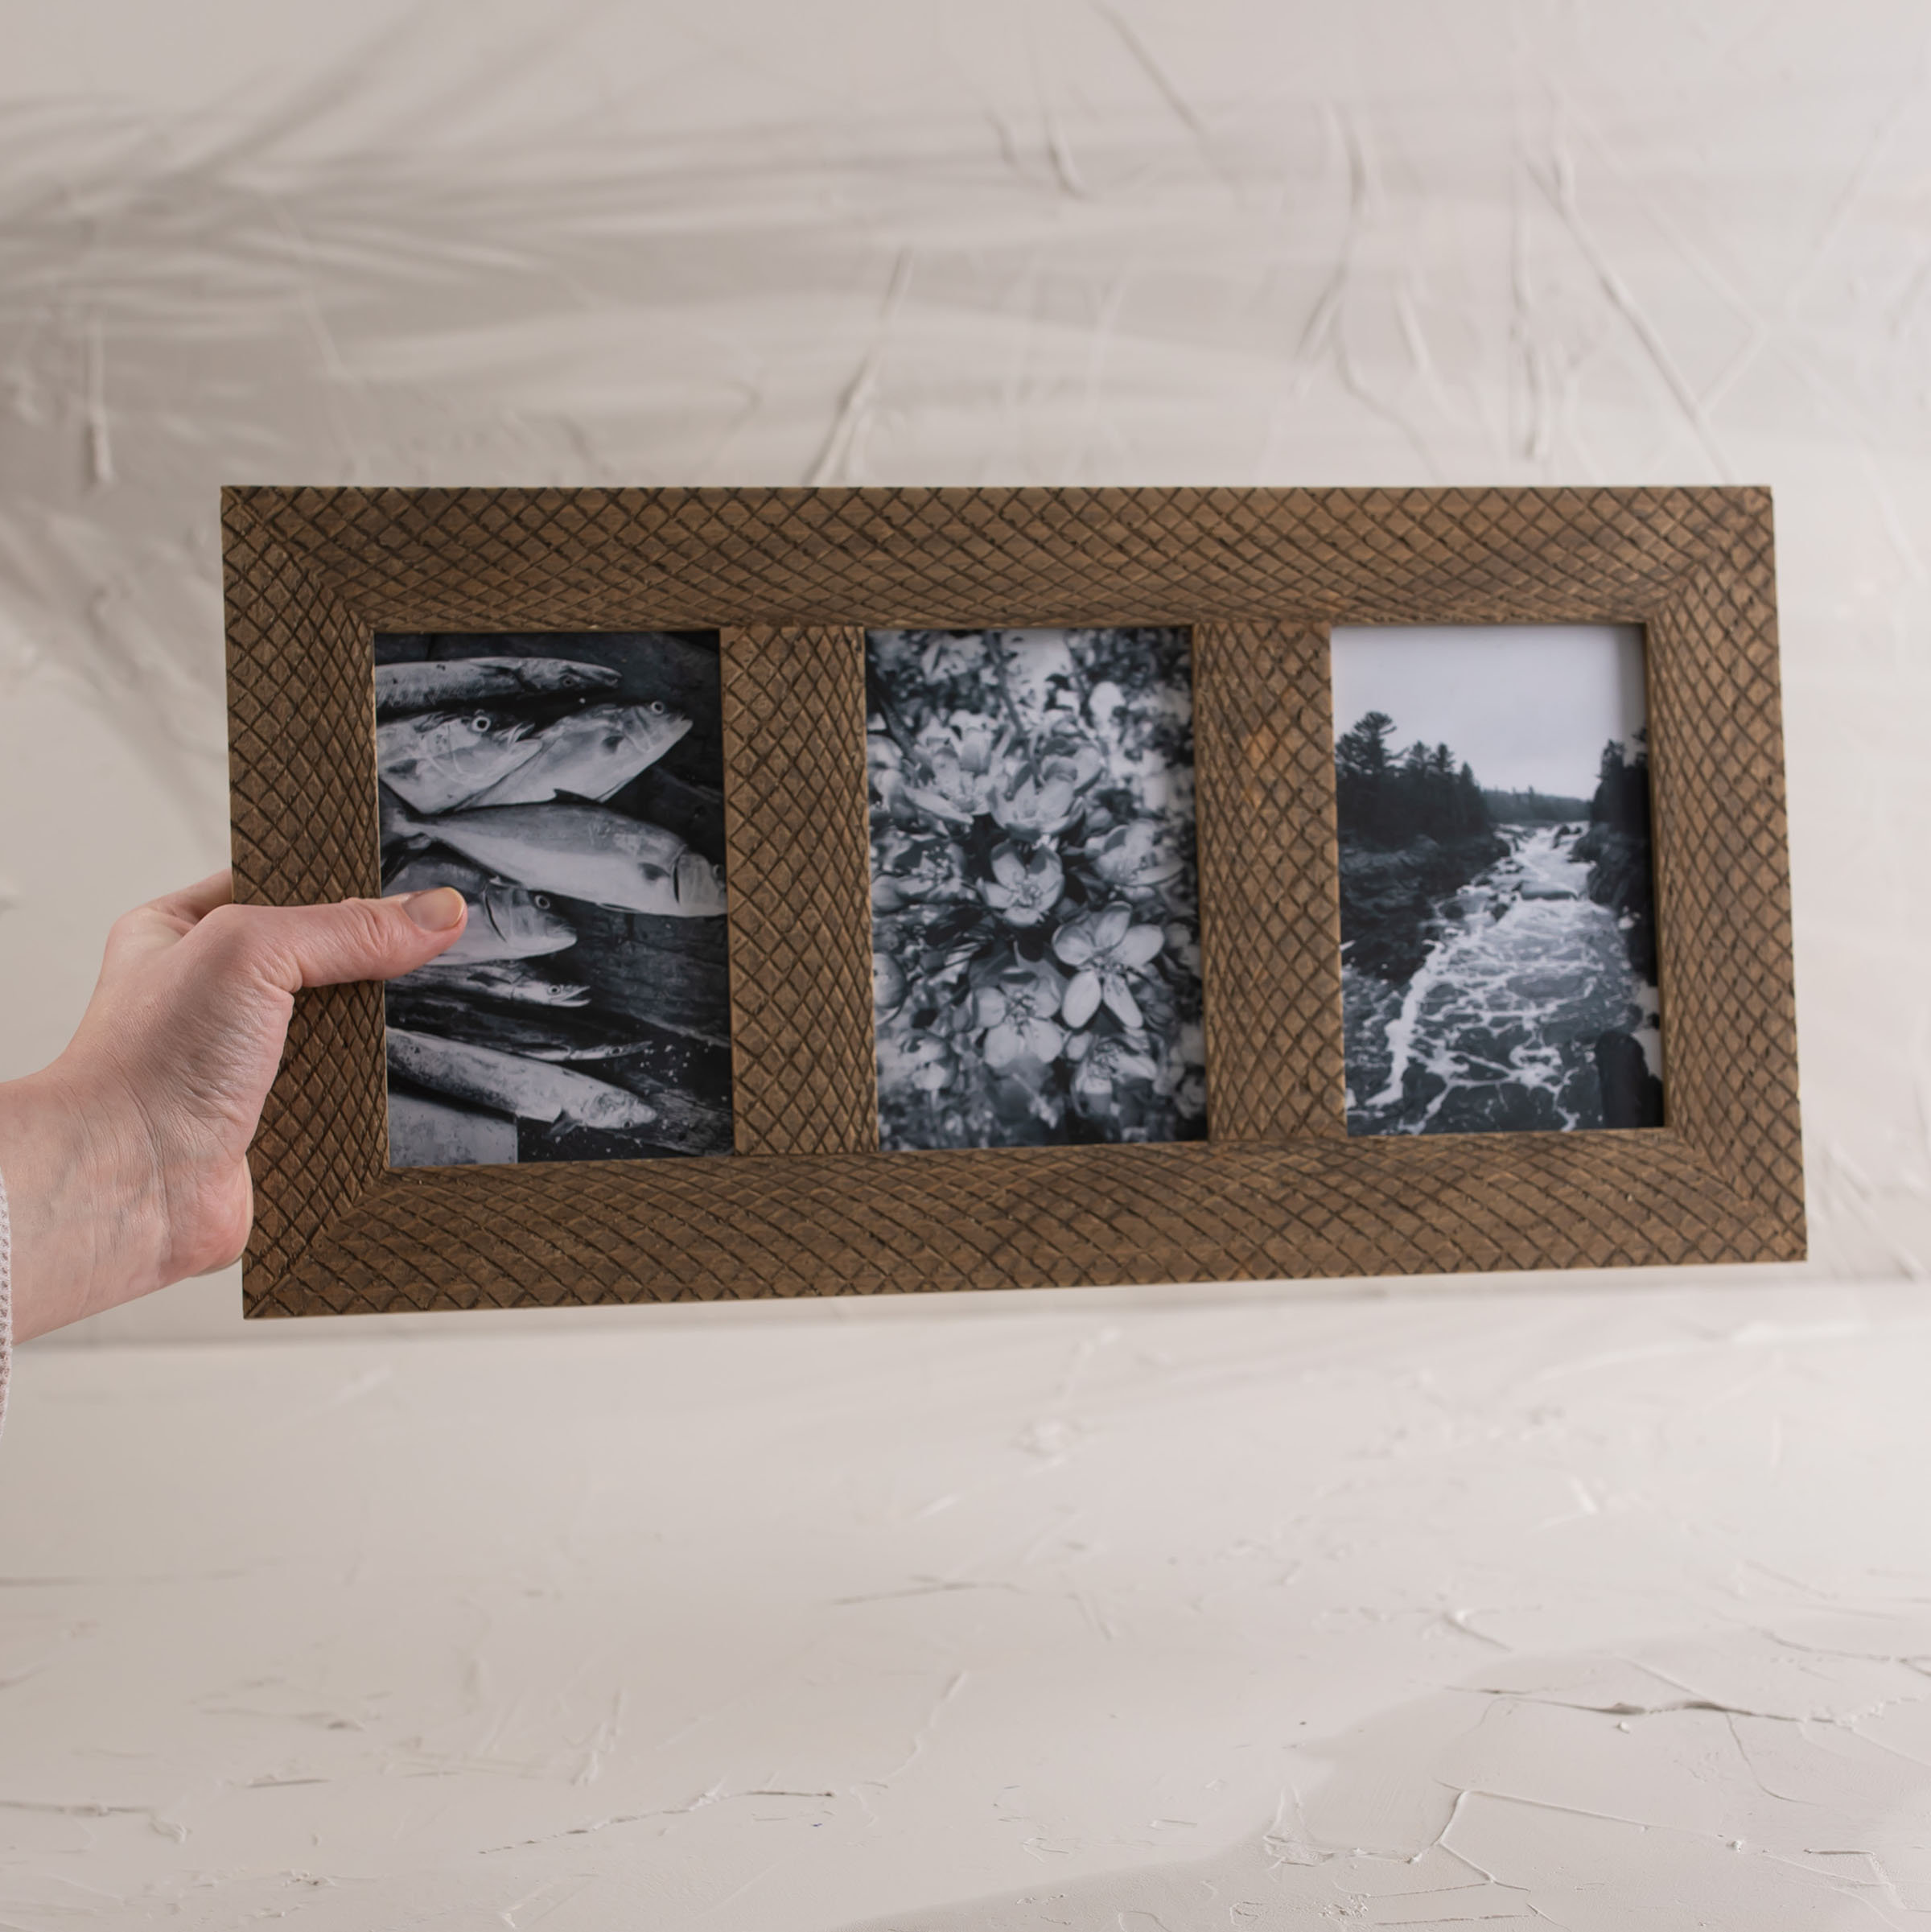 CustomPictureFrames.com 4x6 in Picture Frame Set of 2 Natural Wood Picture Frames for Gallery Wall 2 4x6 in Frames